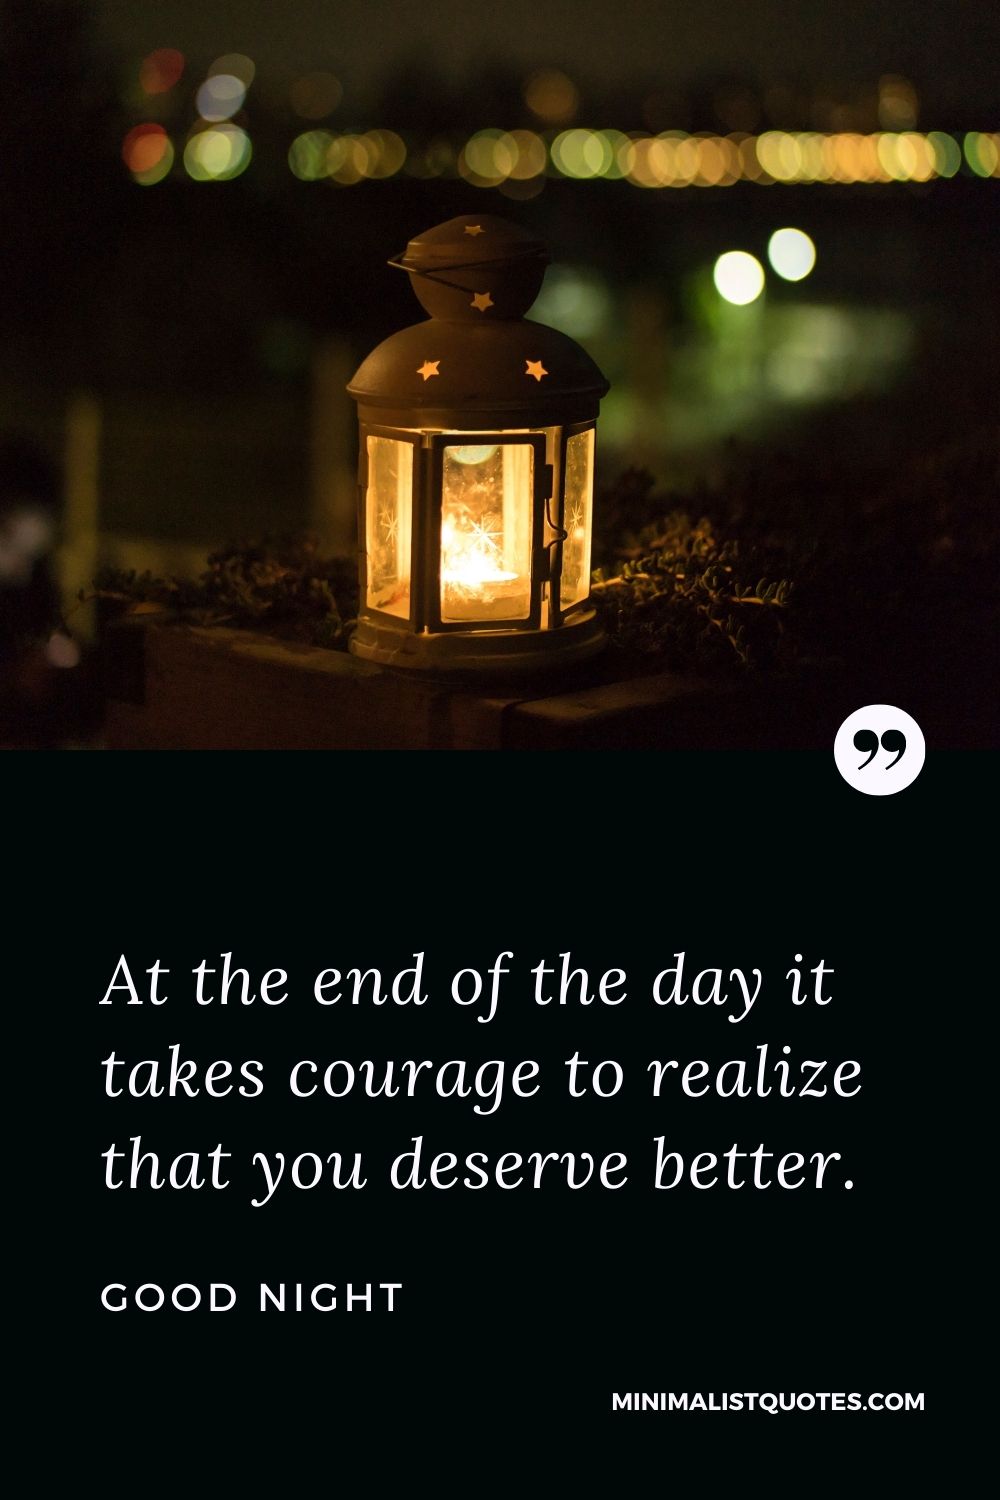 Good Night Wishes - At the end of the day it takes courage to realize that you deserve better.